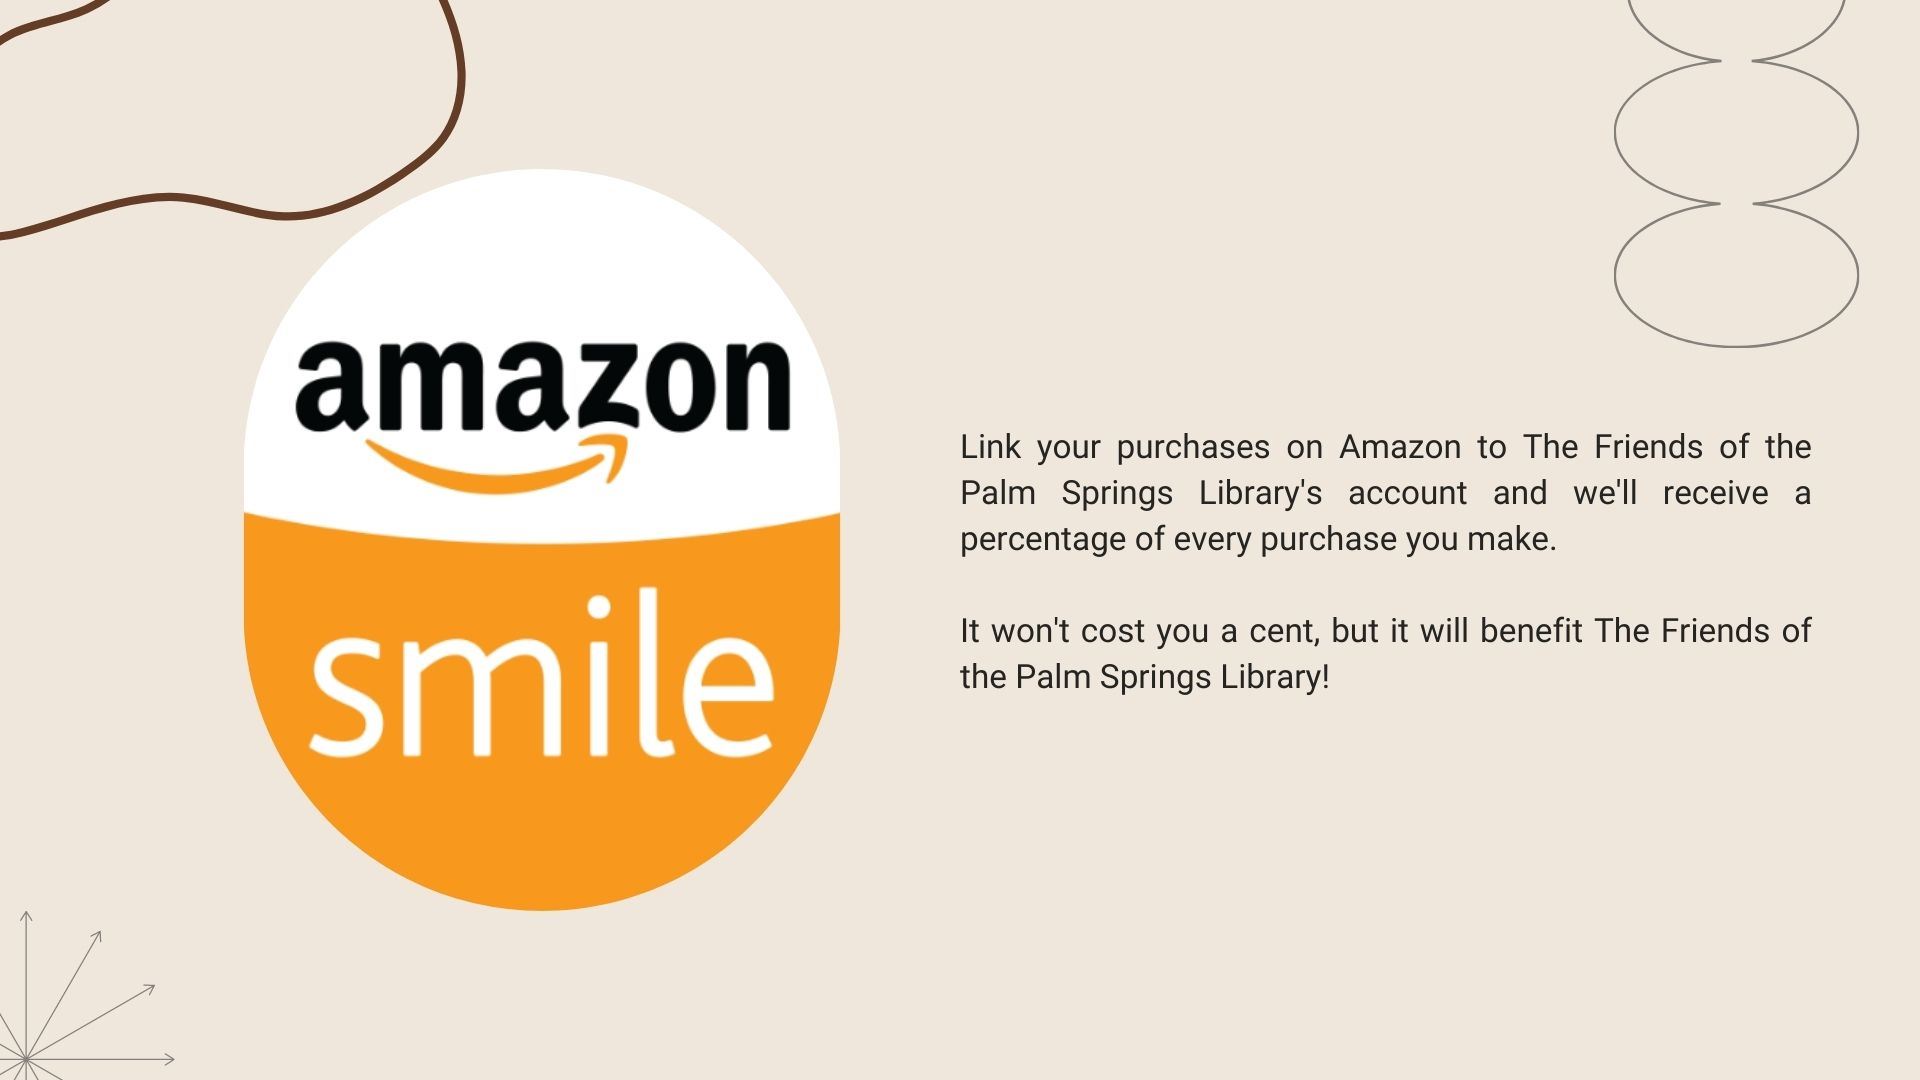 Image of Amazon smile logo.  Link your purchases on Amazon to The Friends of the Palm Springs Library's account and we'll receive a percentage of every purchase you make.  It won't cost you a cent, but it will benefit The Friends of the Palm Springs Library.